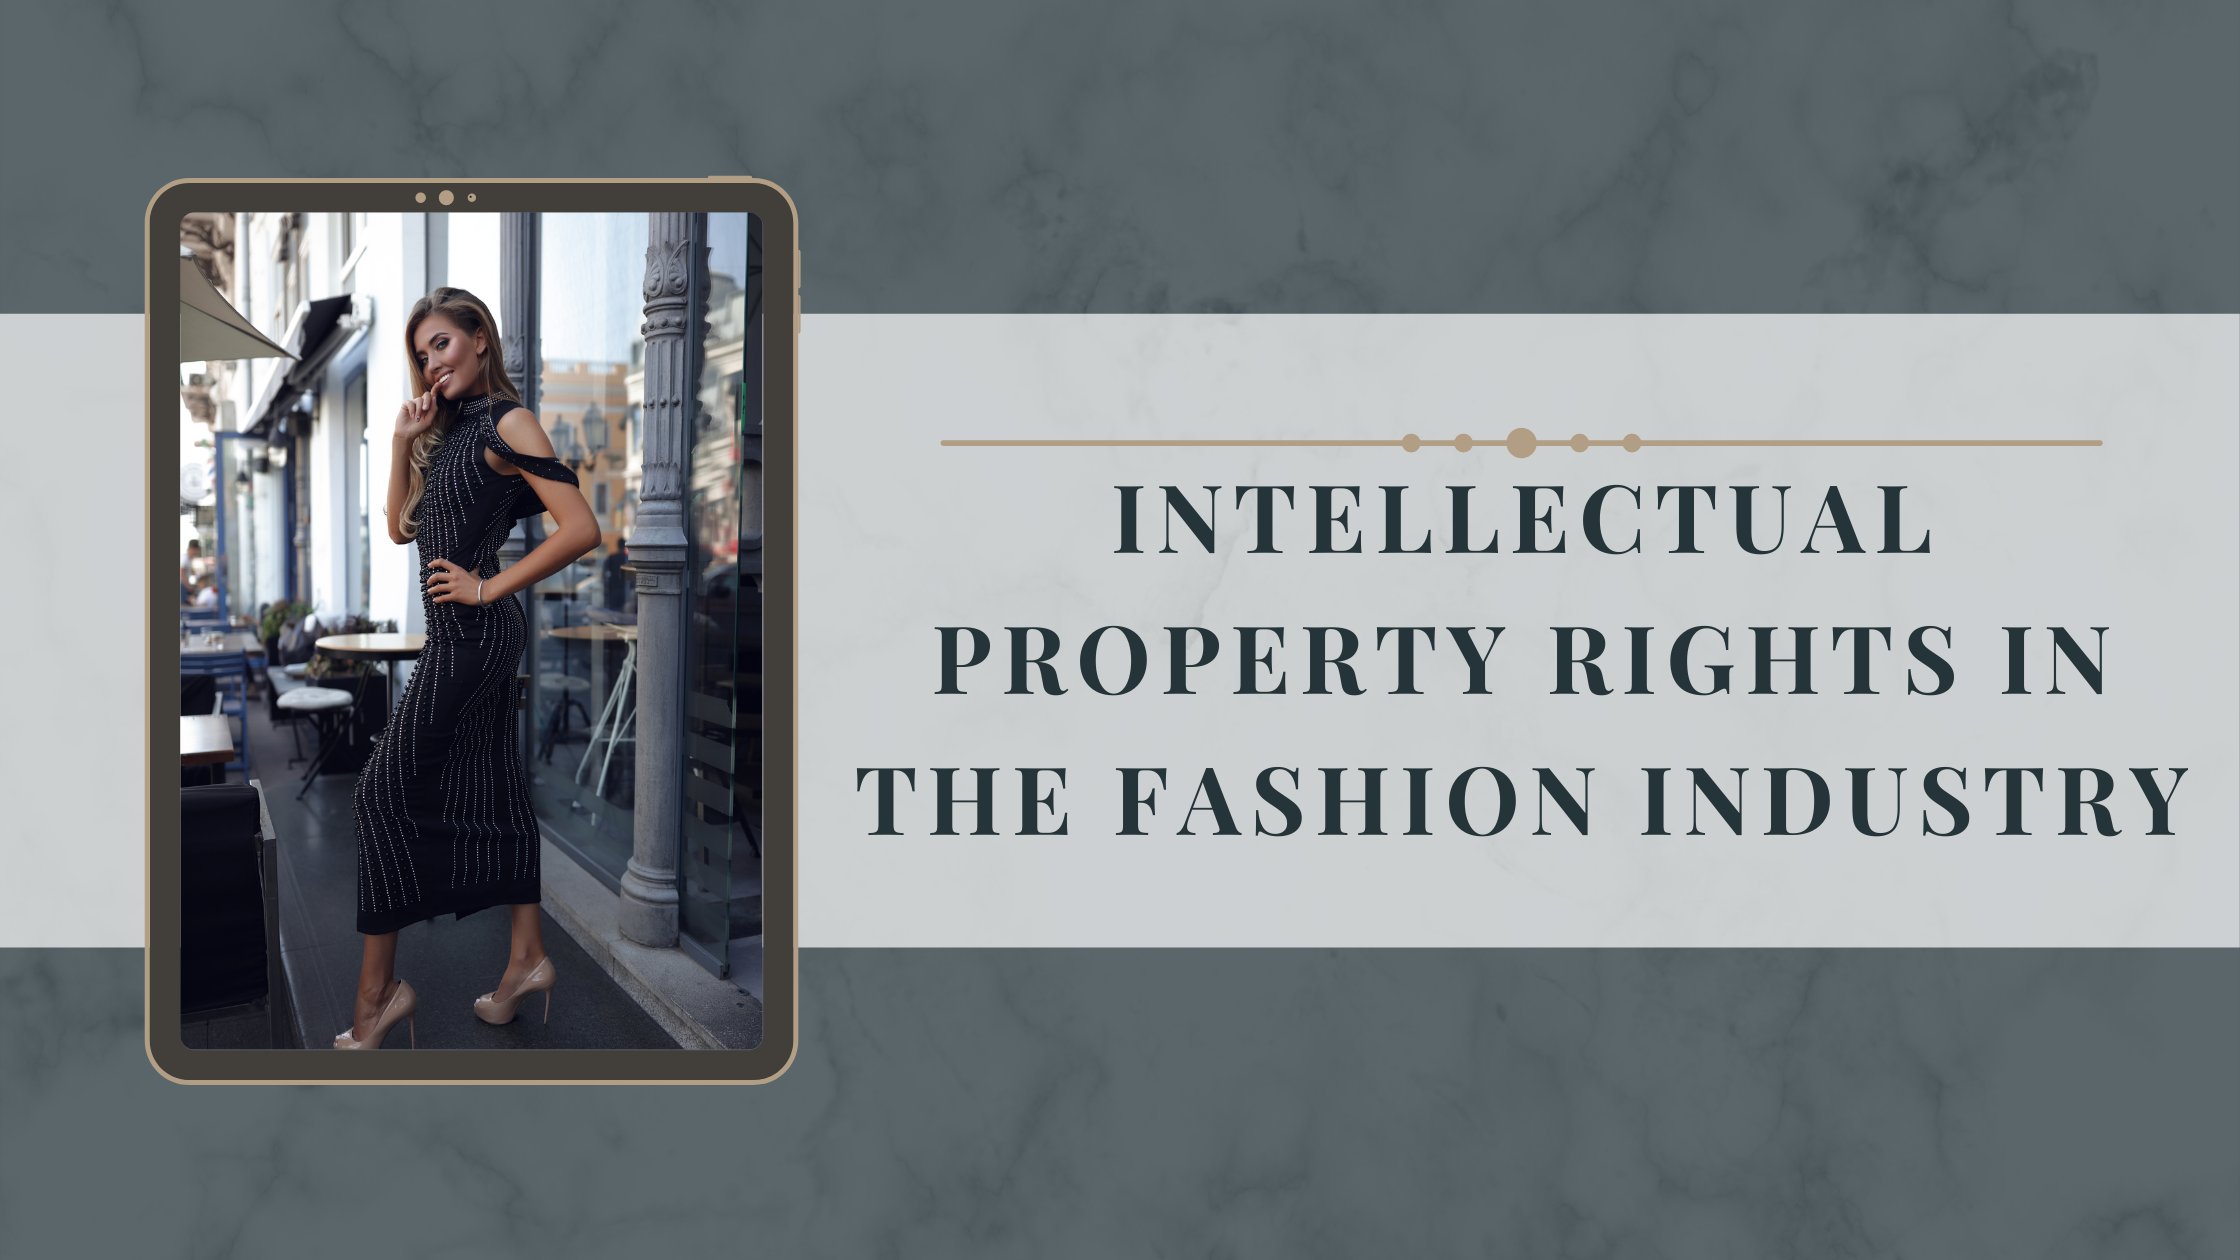 INTELLECTUAL PROPERTY RIGHTS IN THE FASHION INDUSTRY